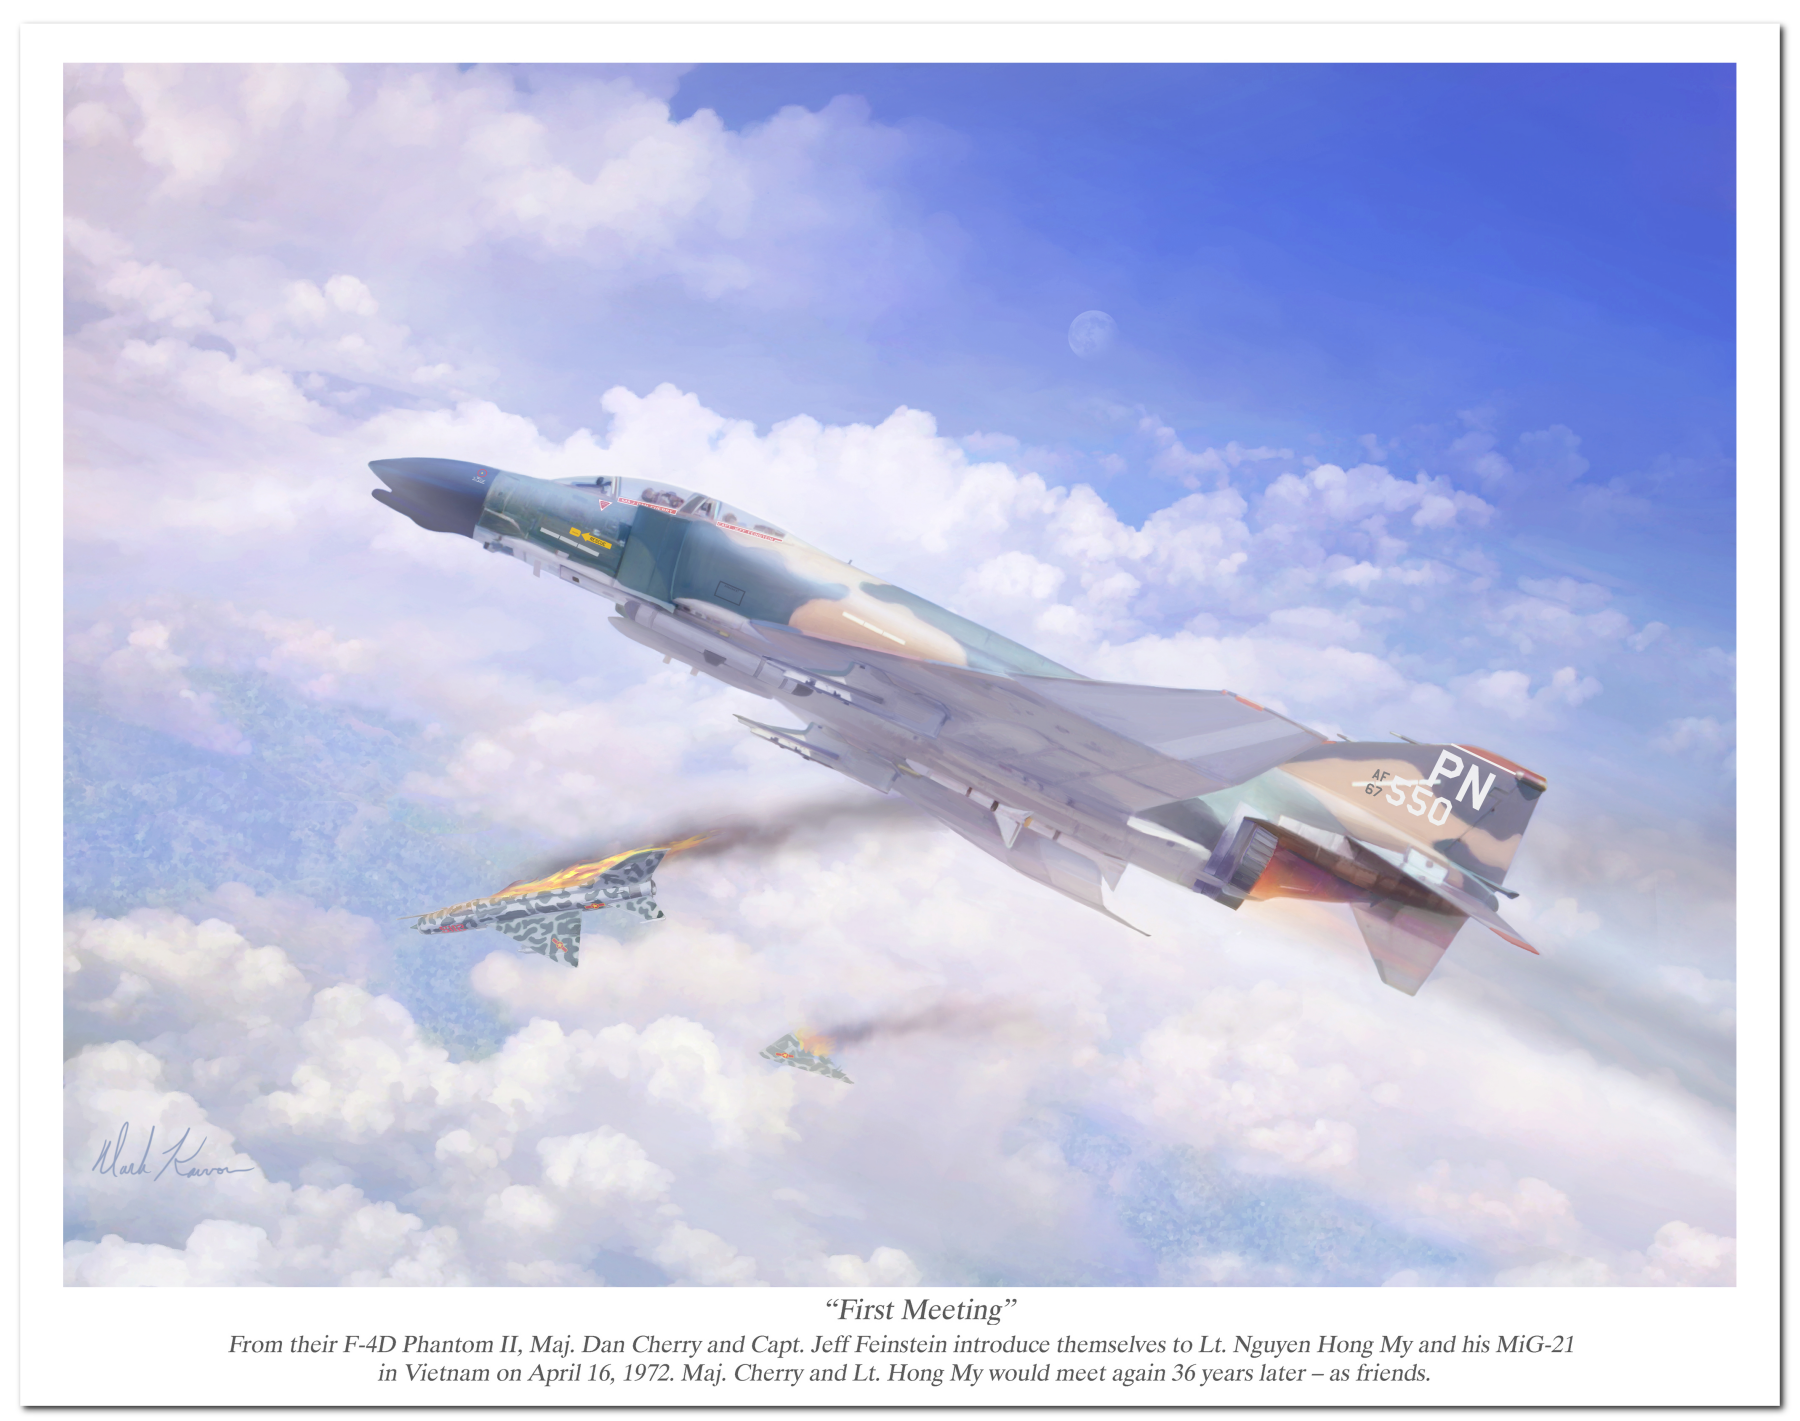 "First Meeting" by Mark Karvon, featuring the US Air Force F-4D Phantom II